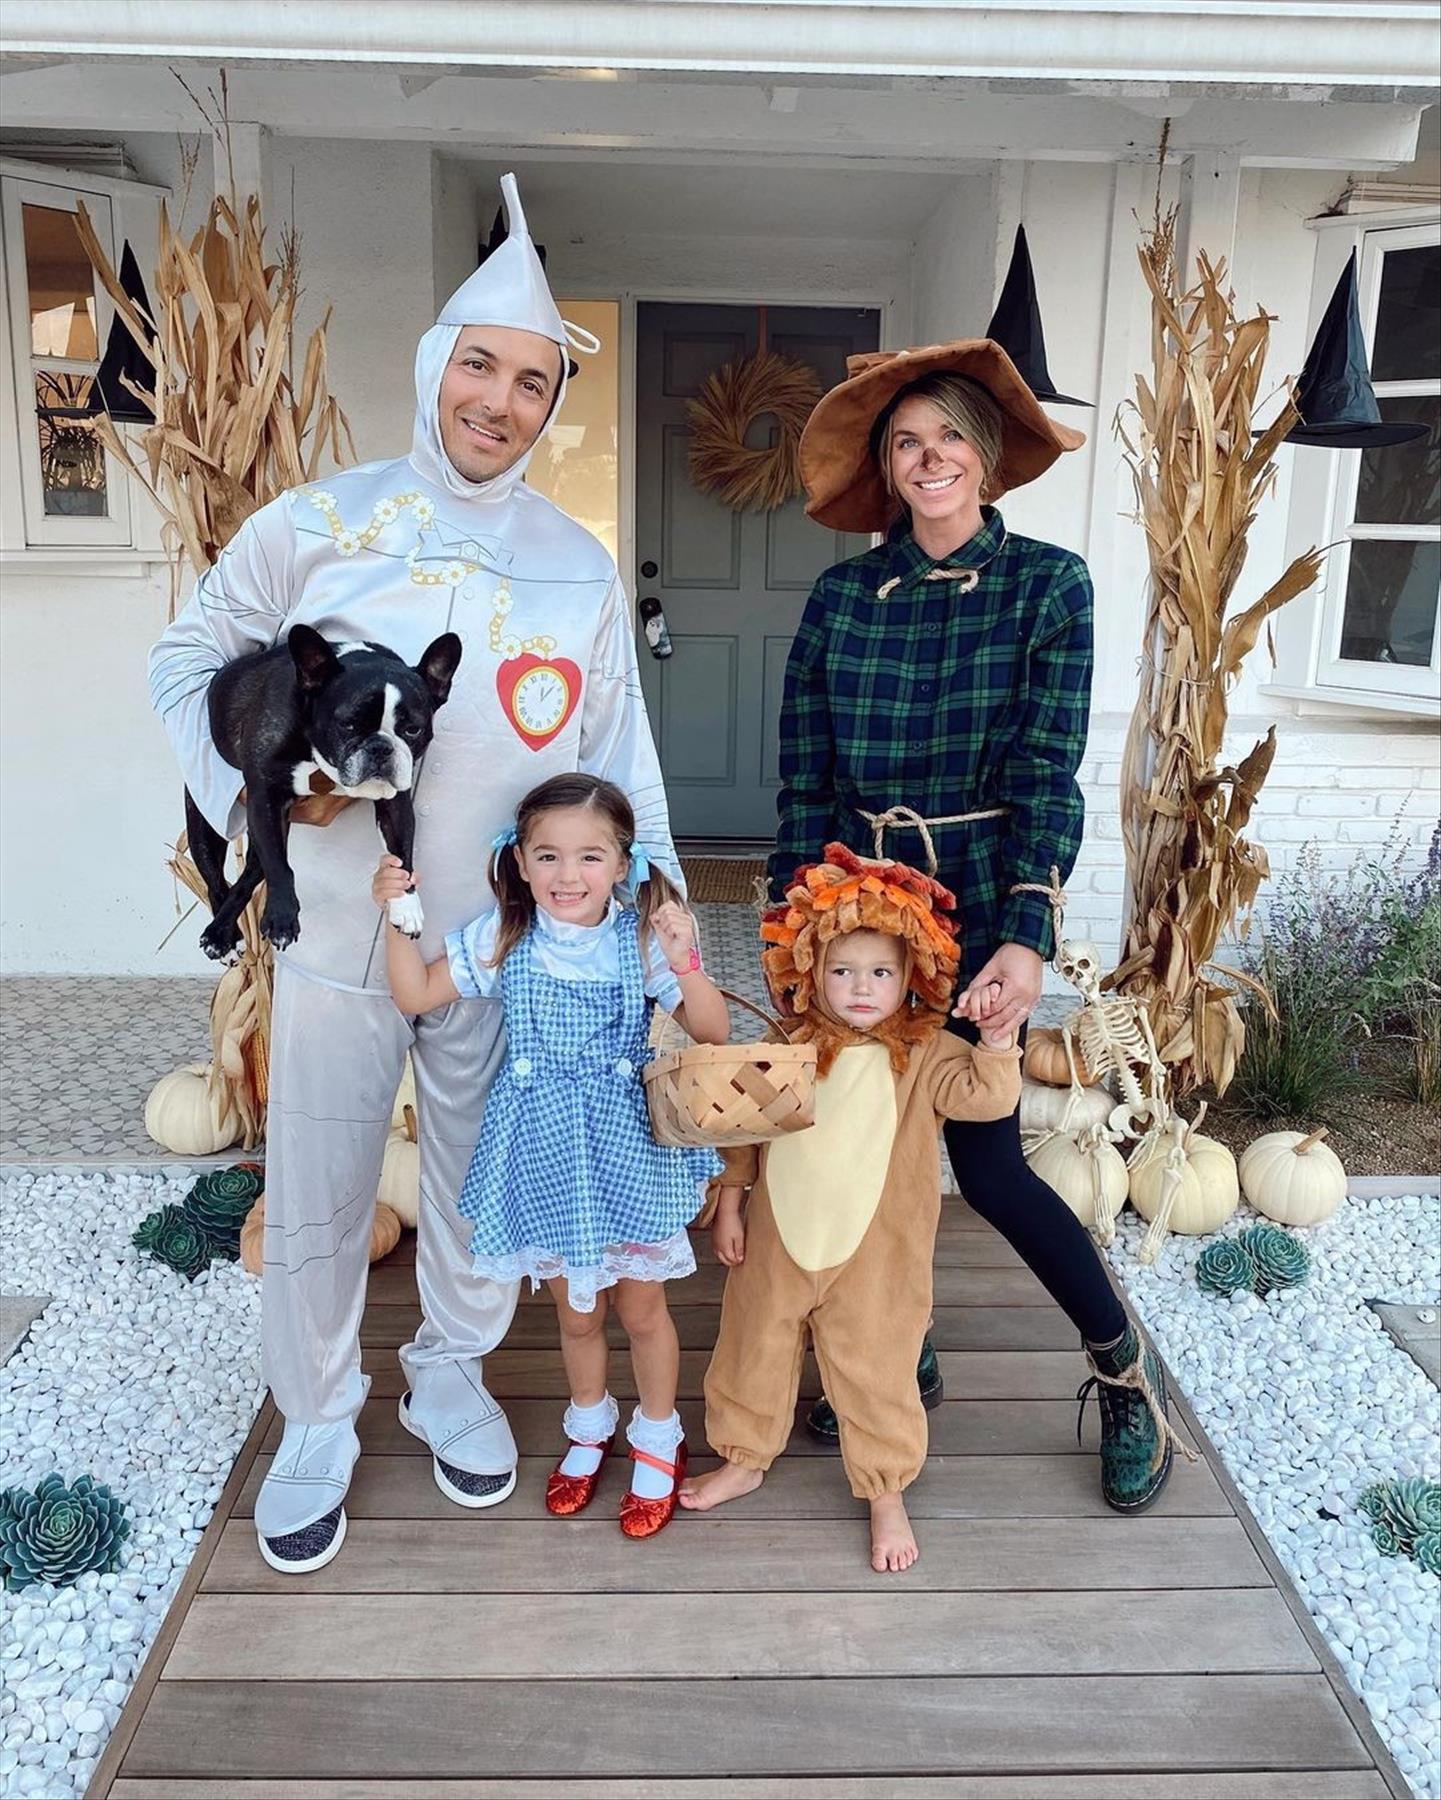 Creative Family Halloween Costumes You’ll Want to Try